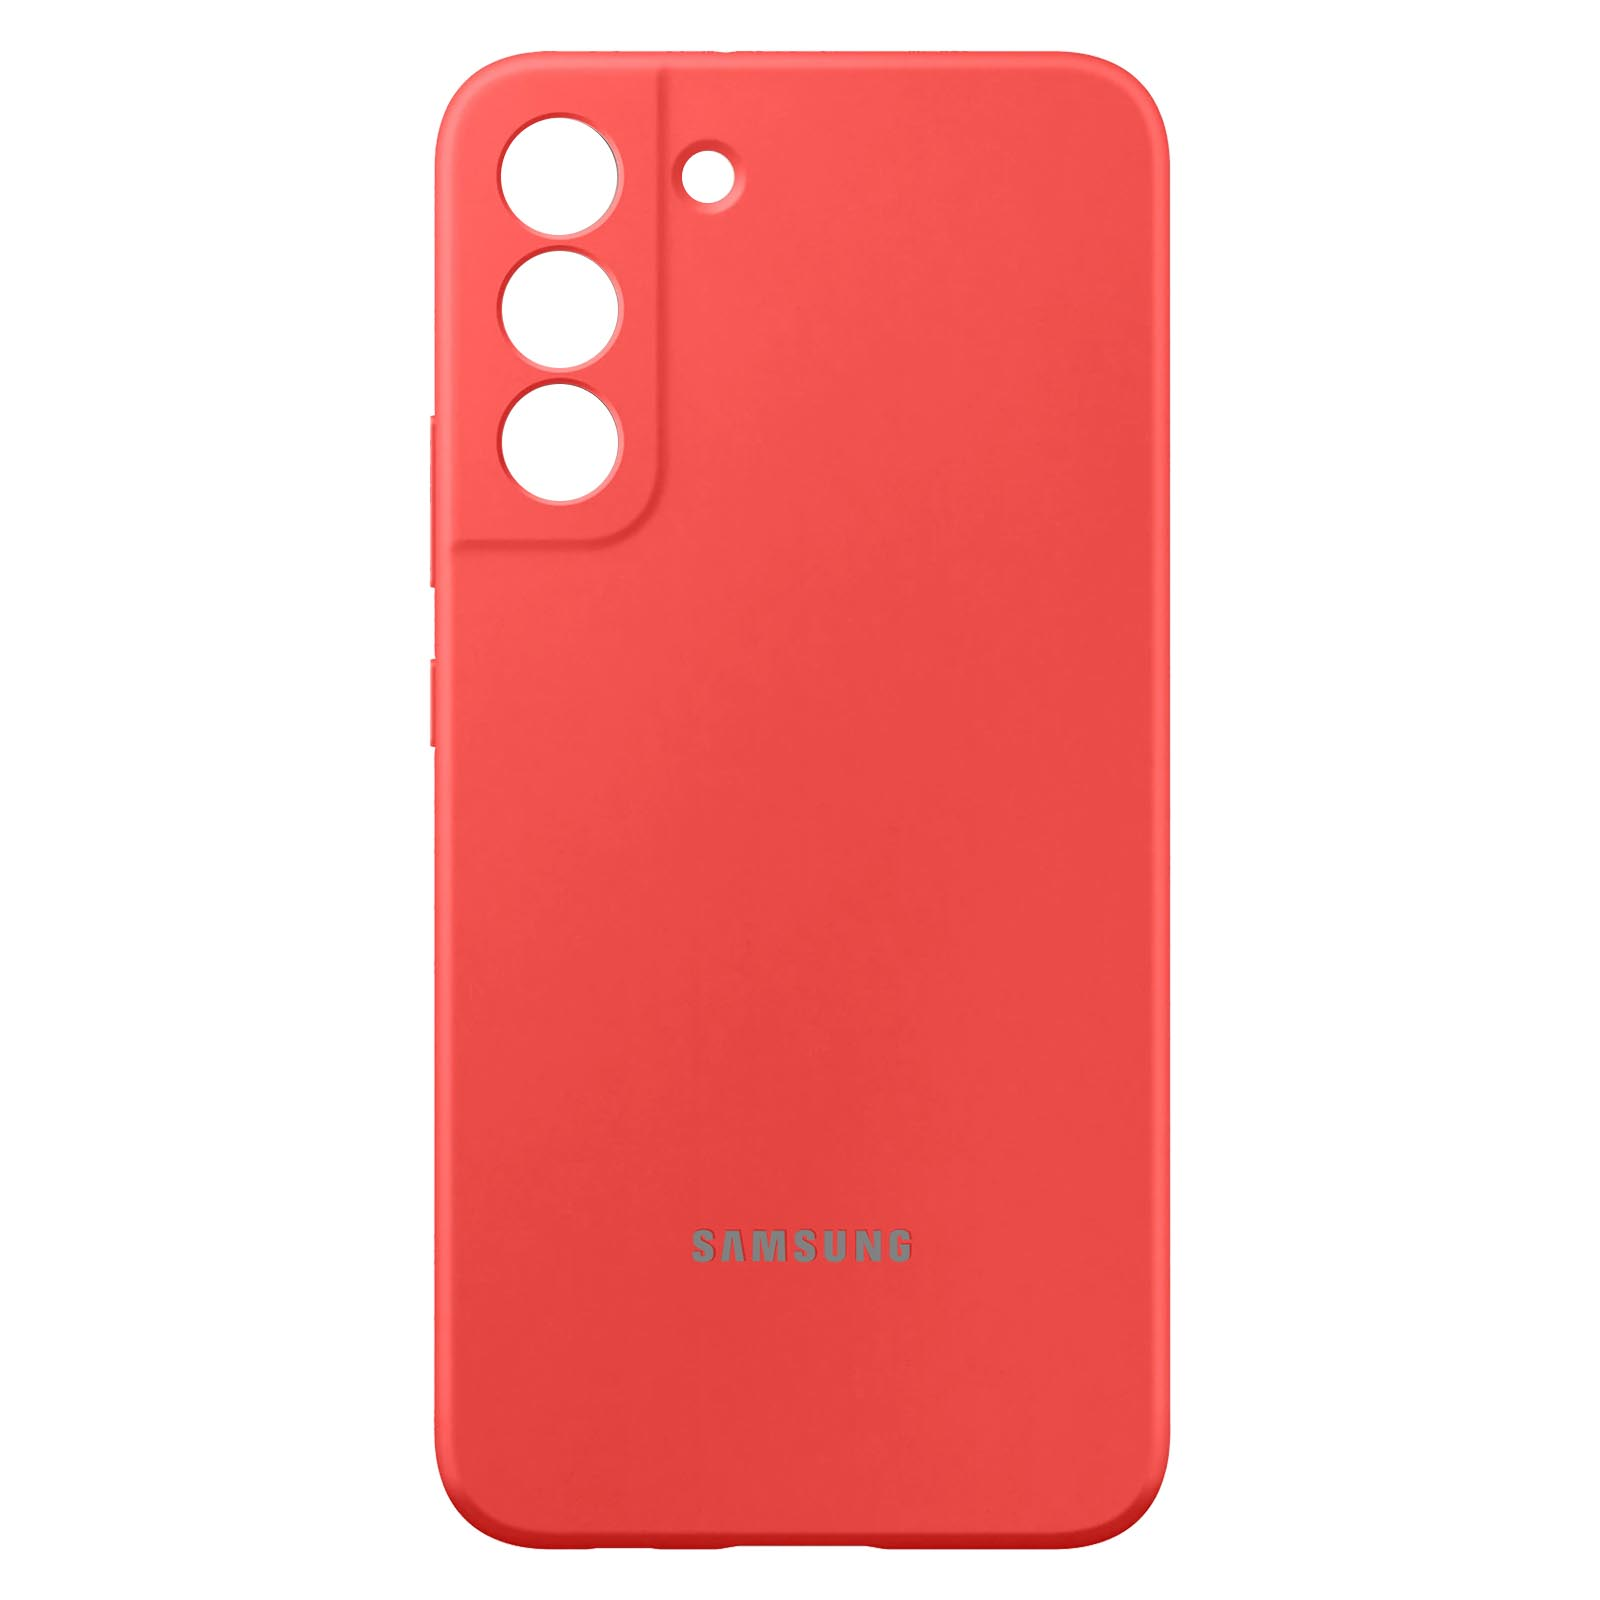 Plus, Backcover, Silicone SAMSUNG Cover S22 Samsung, Korallenrot Galaxy Series,